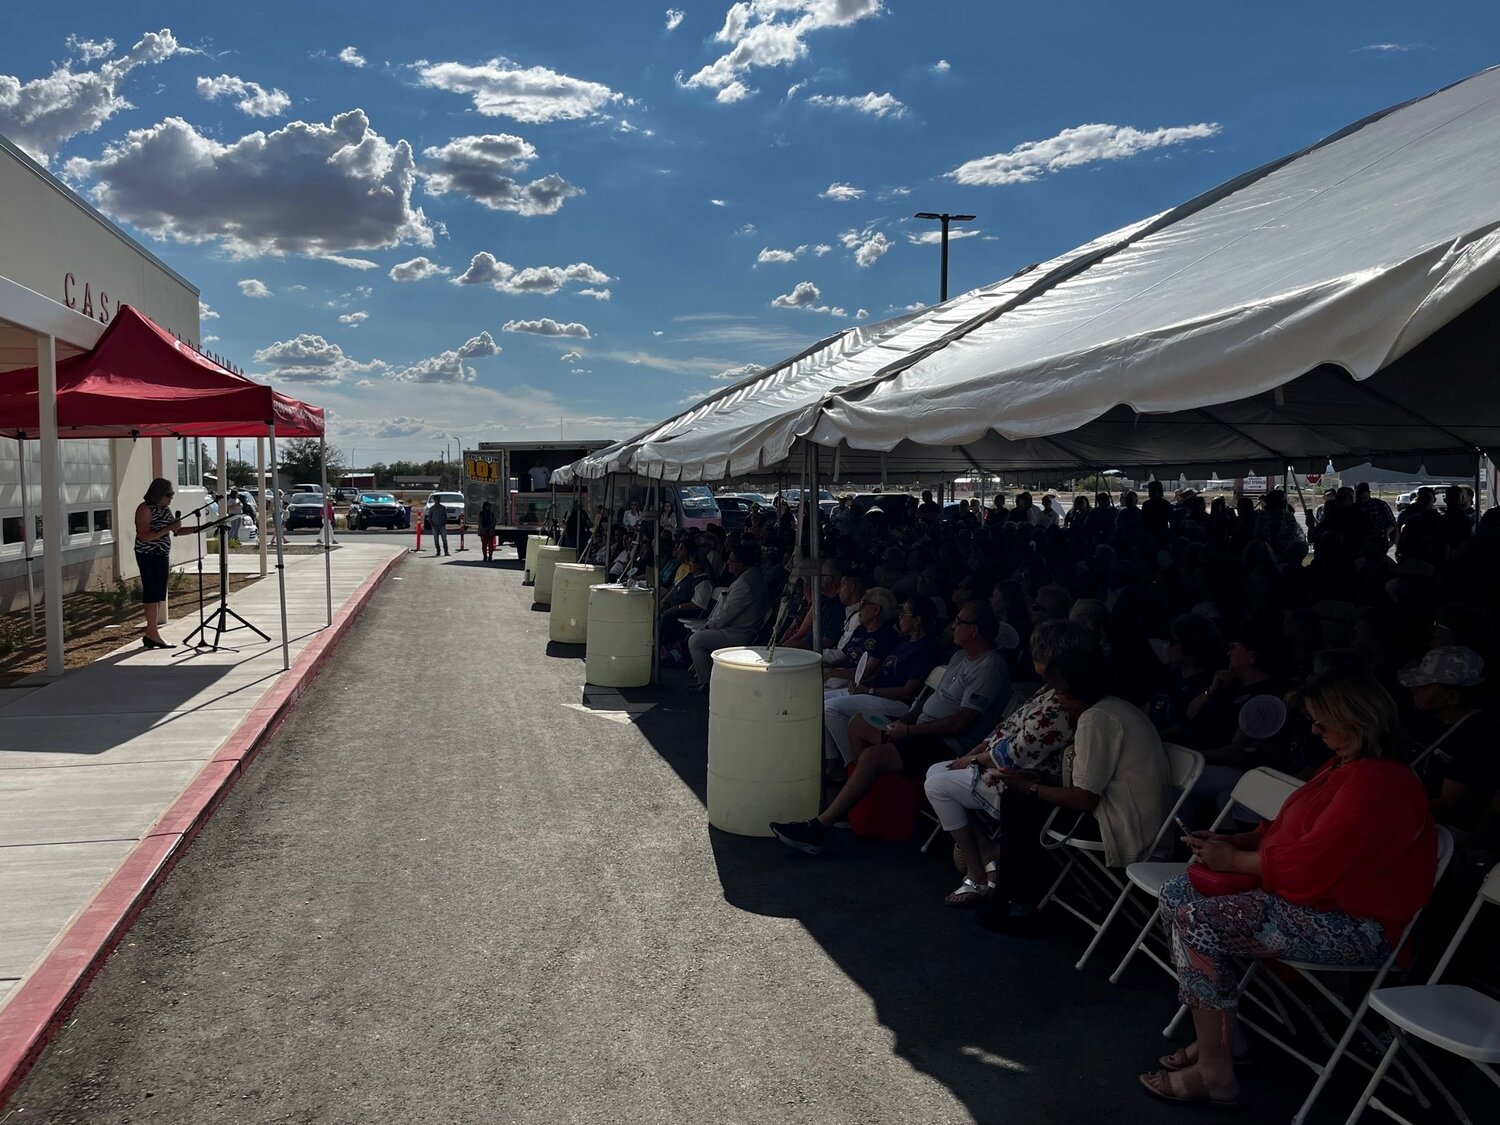 Hundreds of visitors gather under a tent in the parking lot to hear speakers look back as well as forward on the history and future of Casa de Peregrinos.